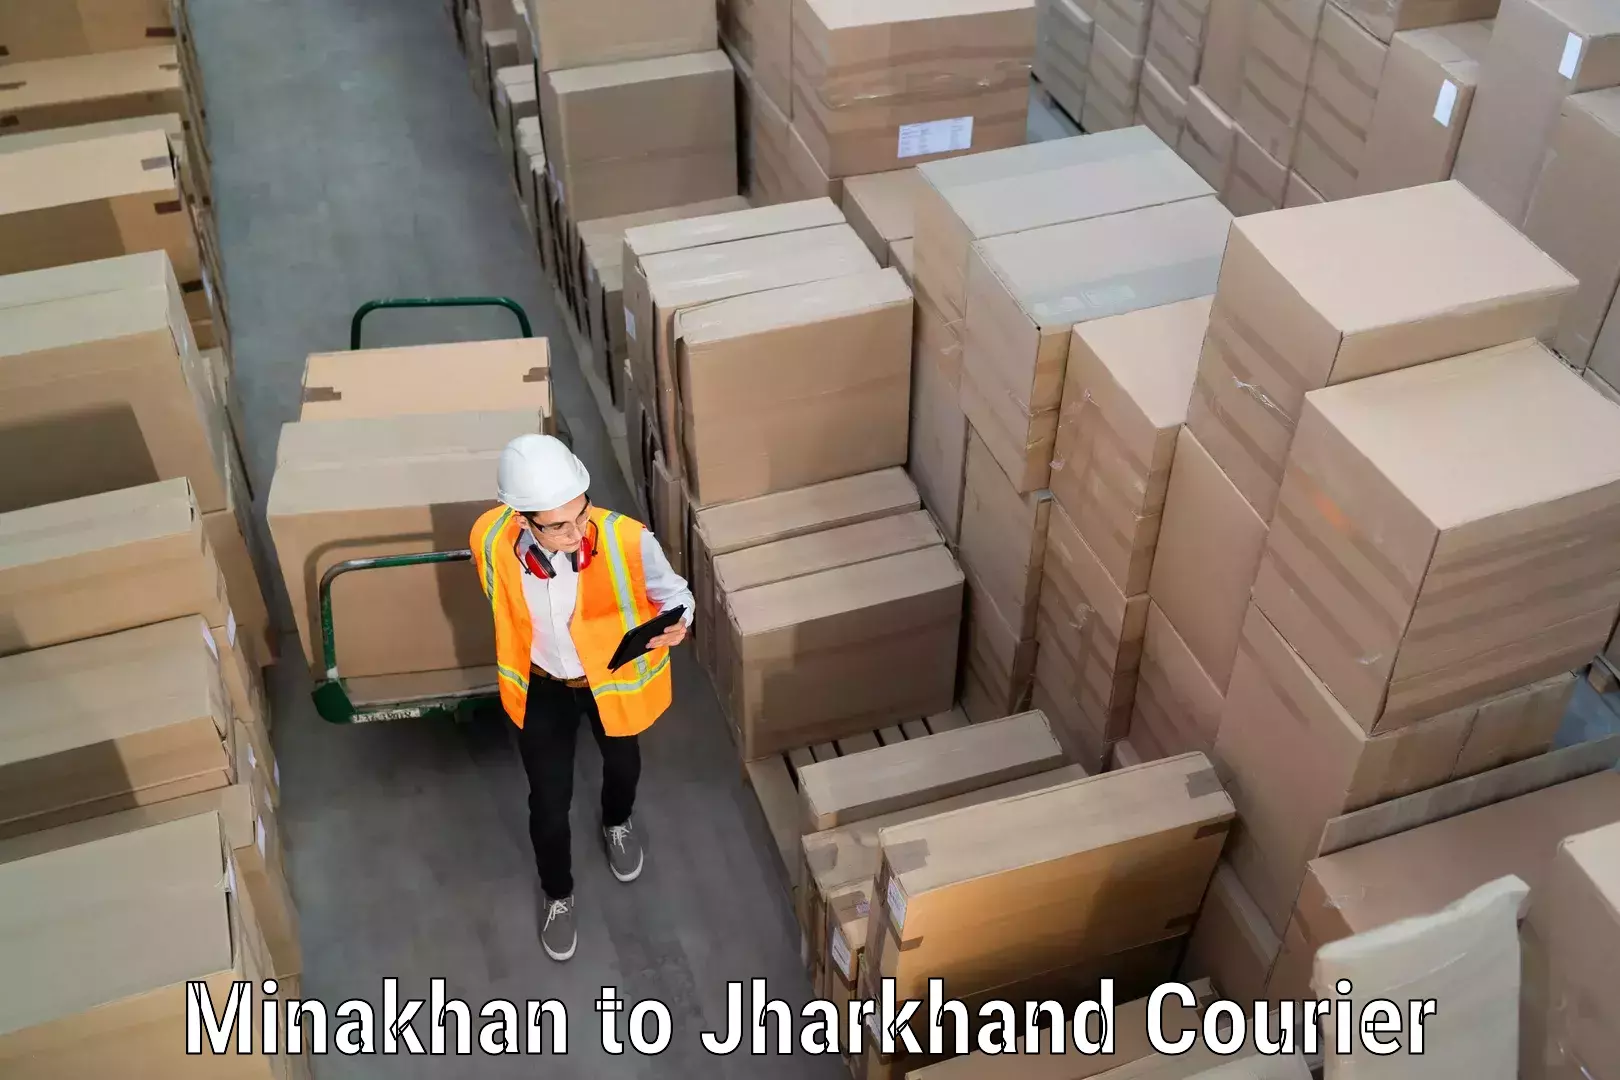 Furniture transport specialists Minakhan to Jharkhand